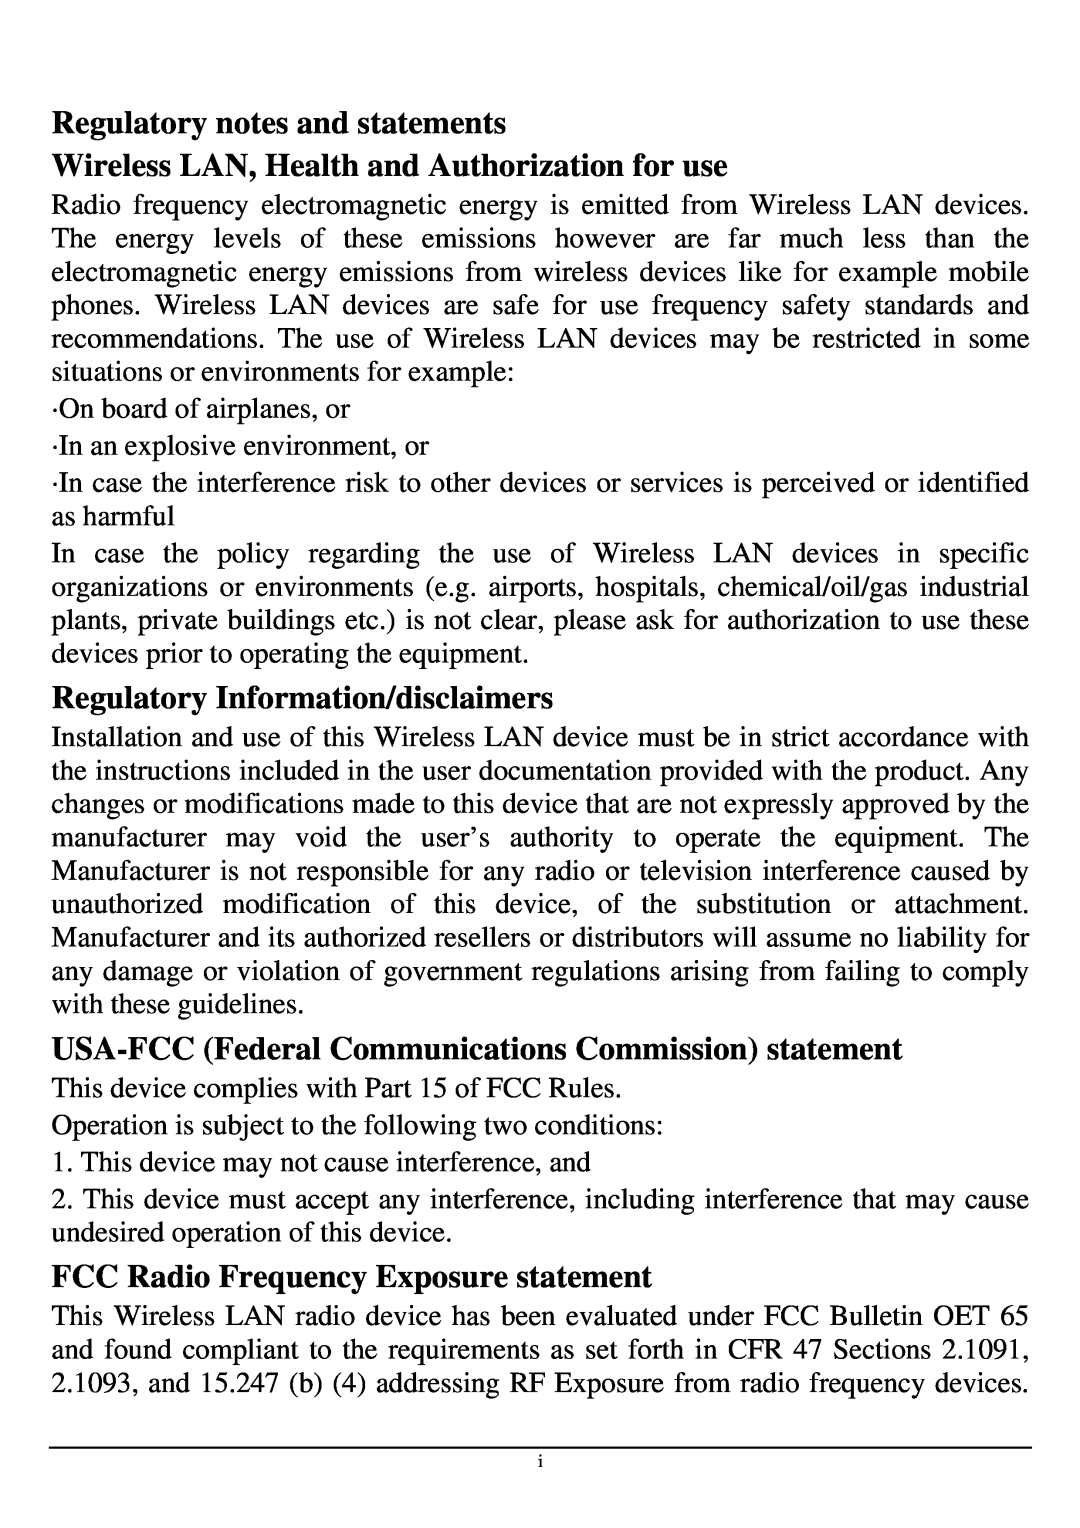 TRENDnet TEW-424UB manual Regulatory notes and statements, Wireless LAN, Health and Authorization for use 